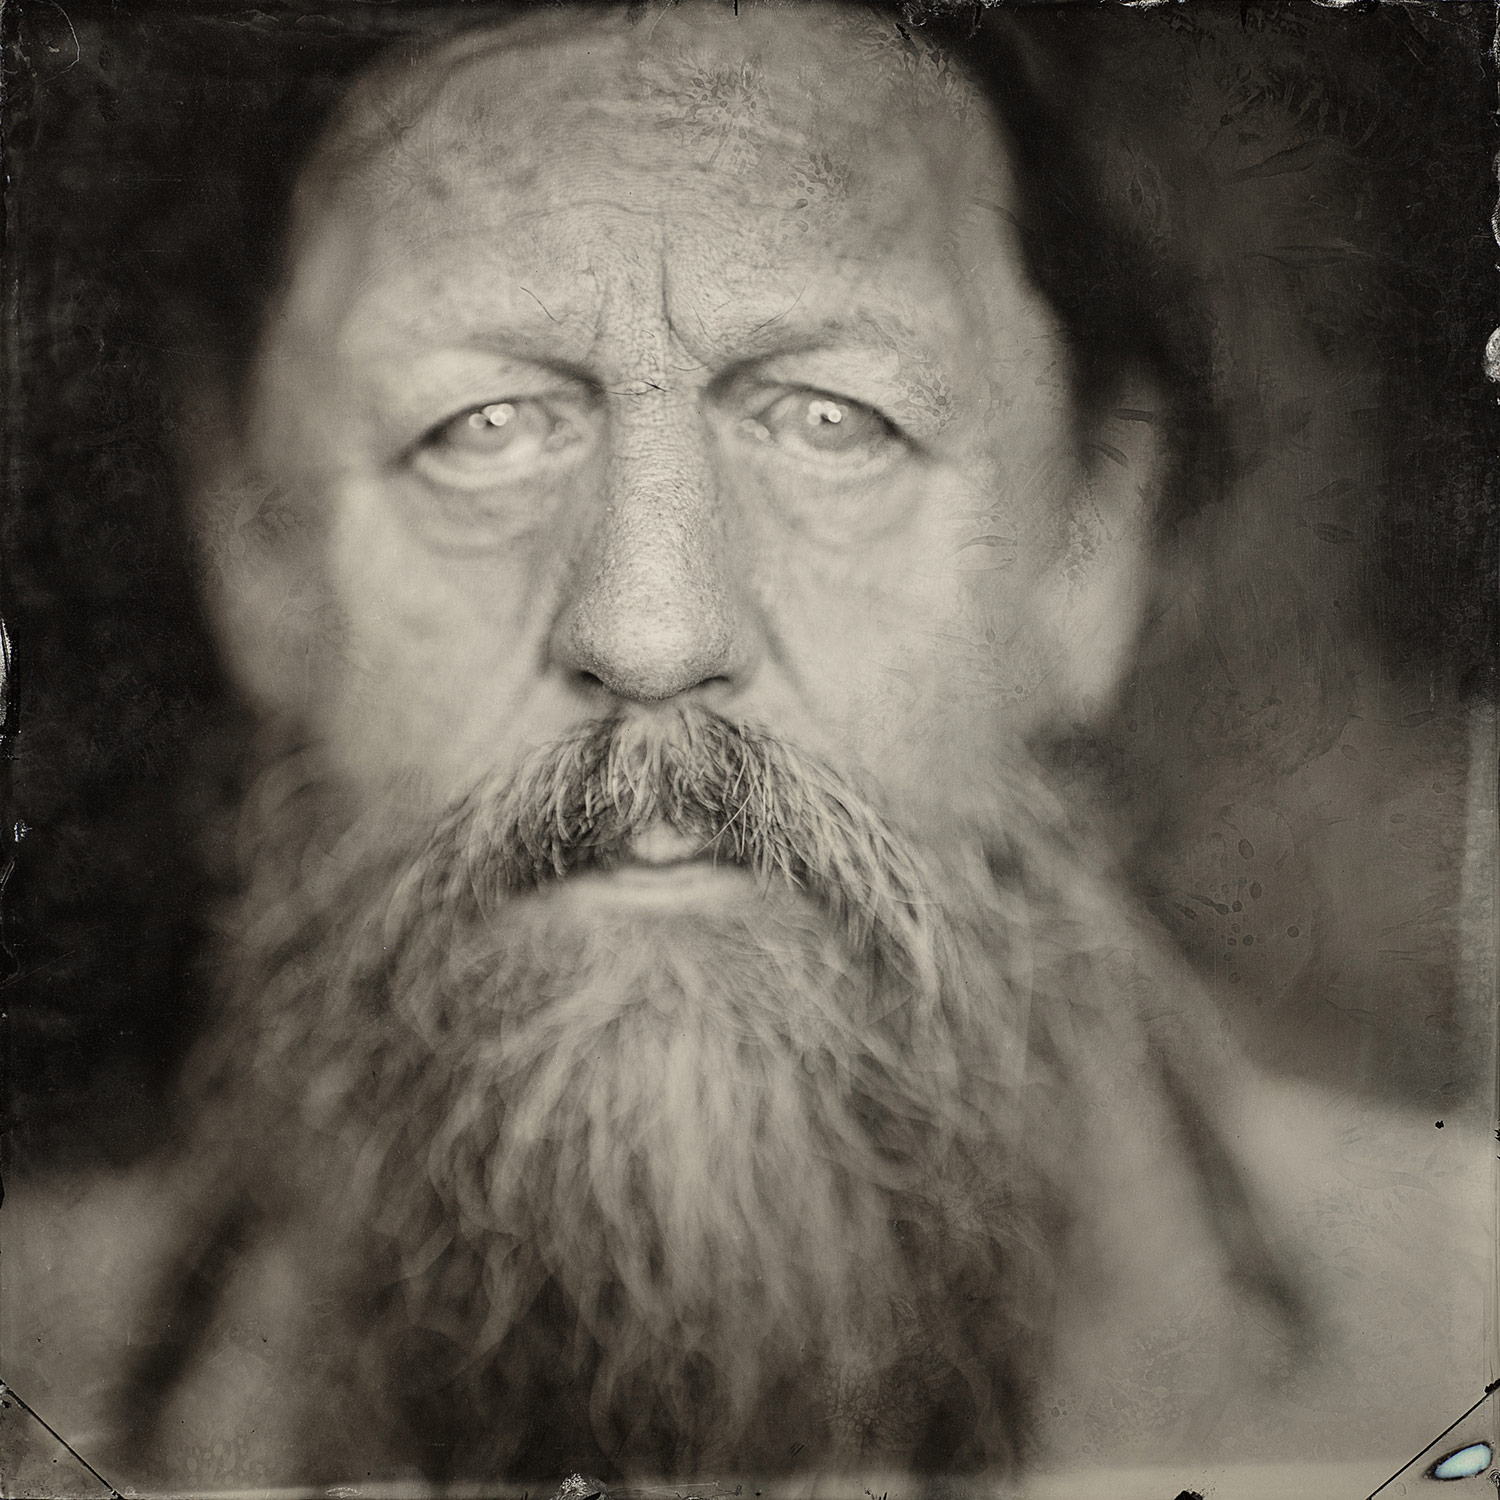 Wet plate portraits honoring overlooked blues musicians in the South